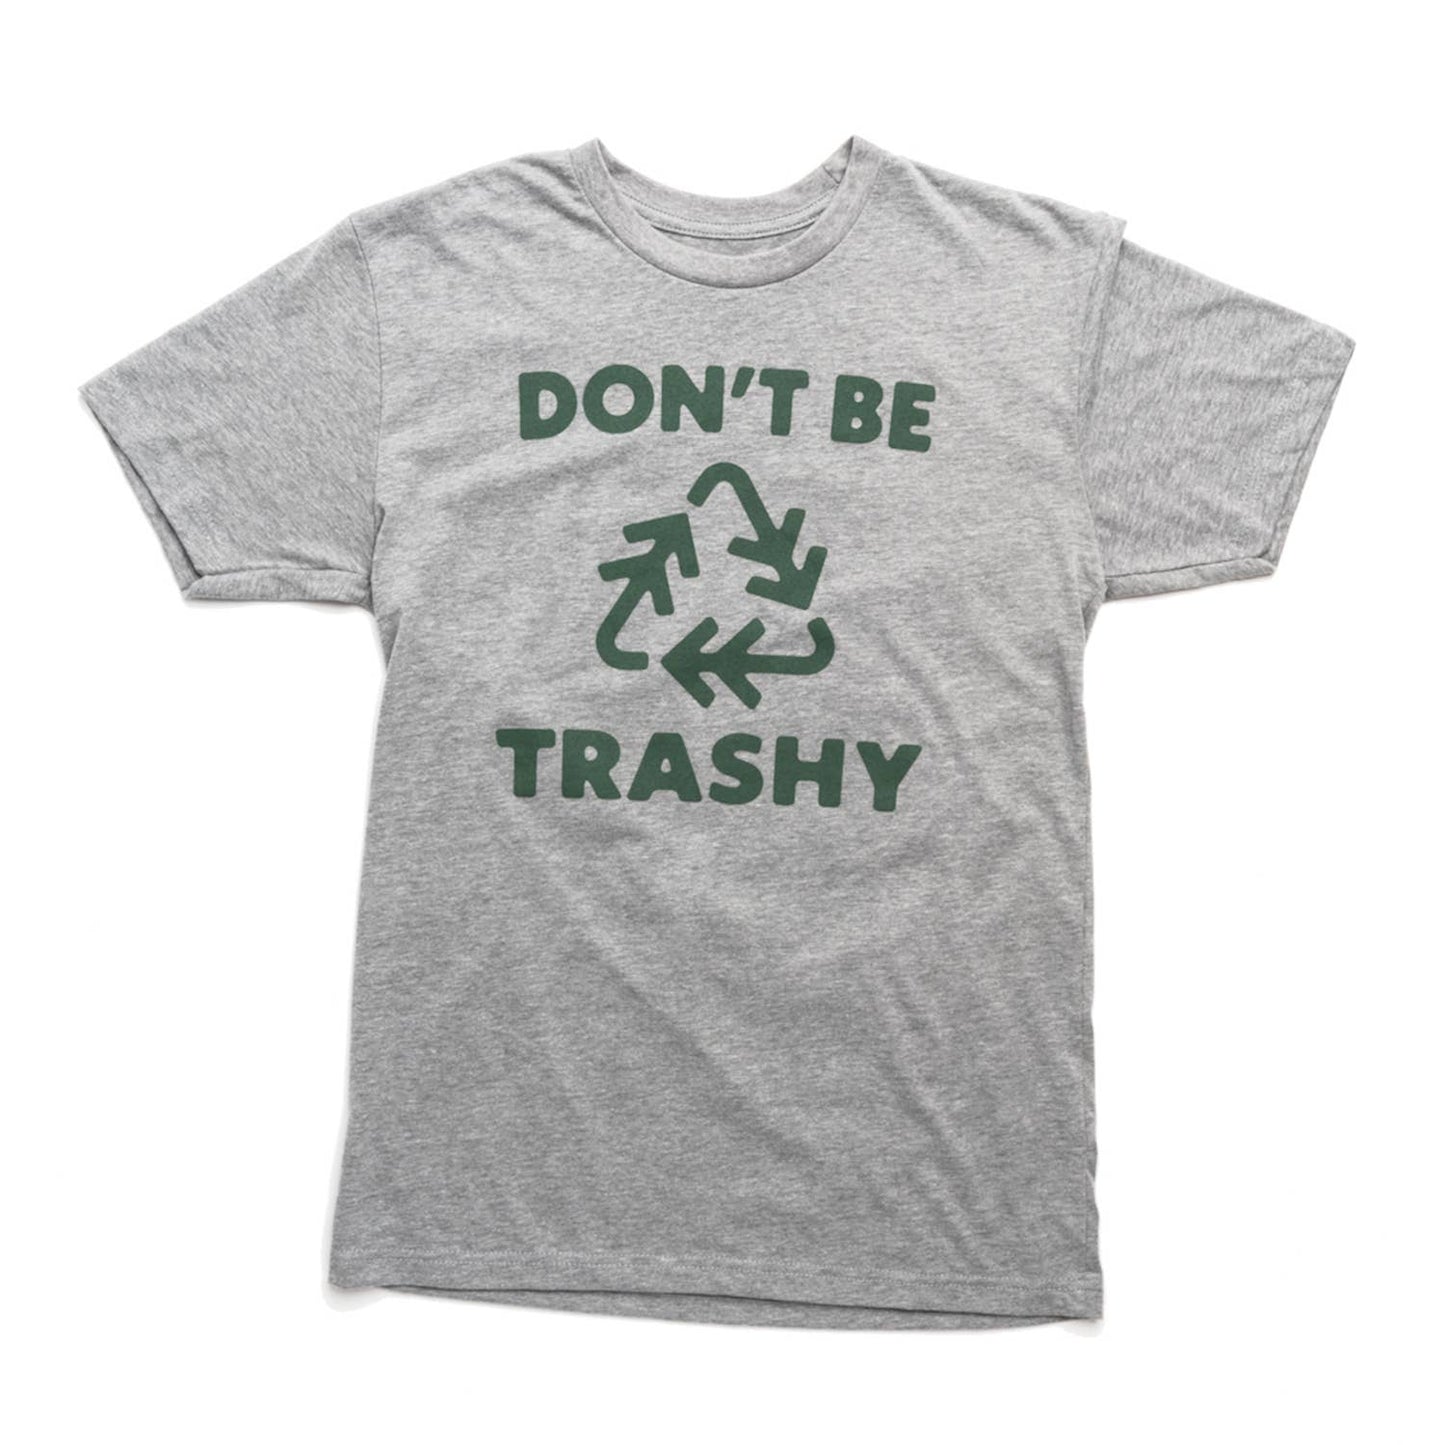 Don't be trashy shirt in gray by Keep Nature Wild